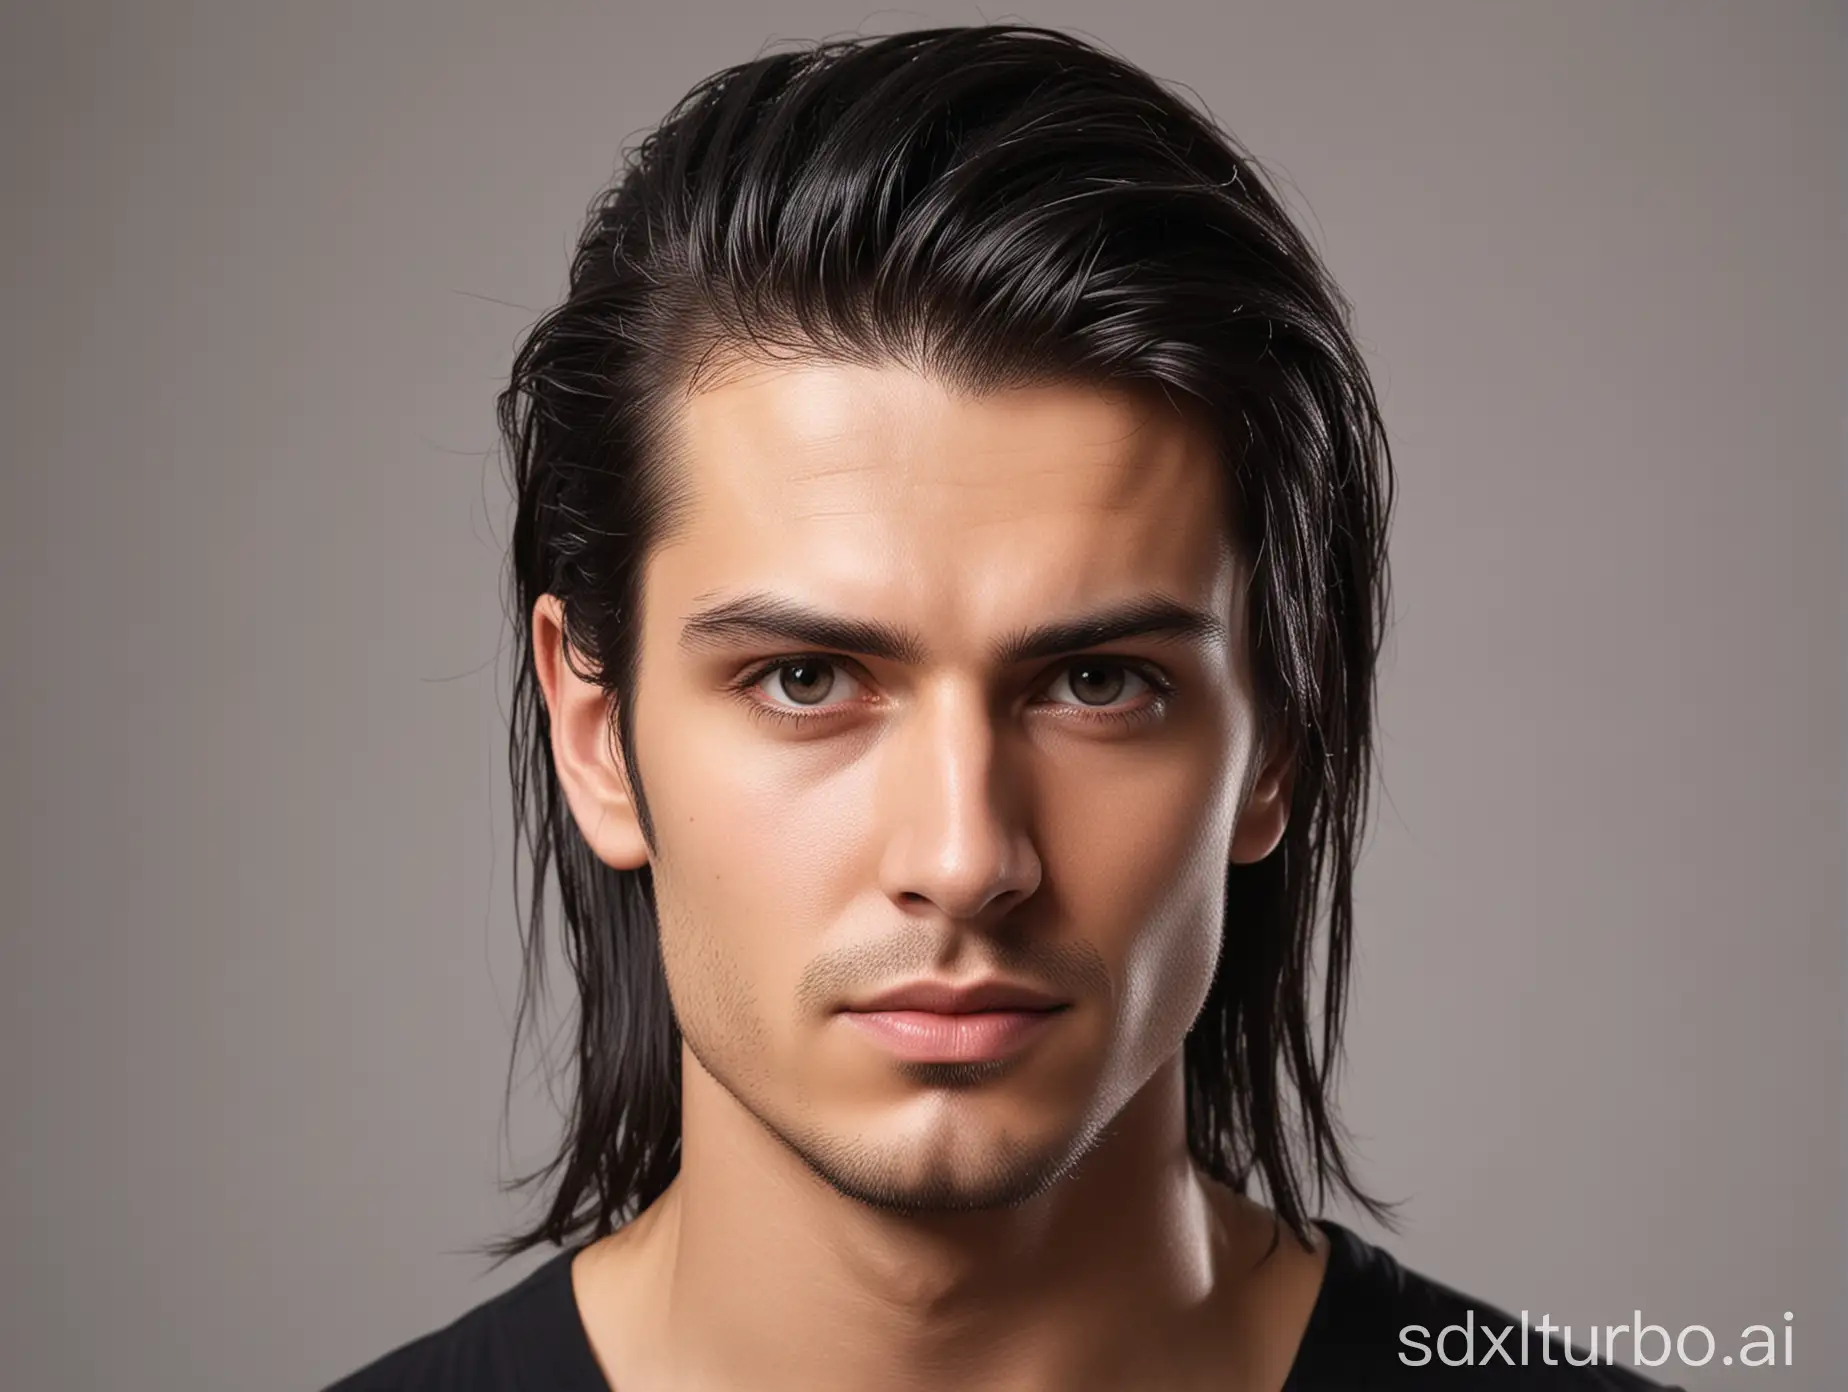 Portrait-of-a-Confident-Man-with-Long-PulledBack-Black-Hair